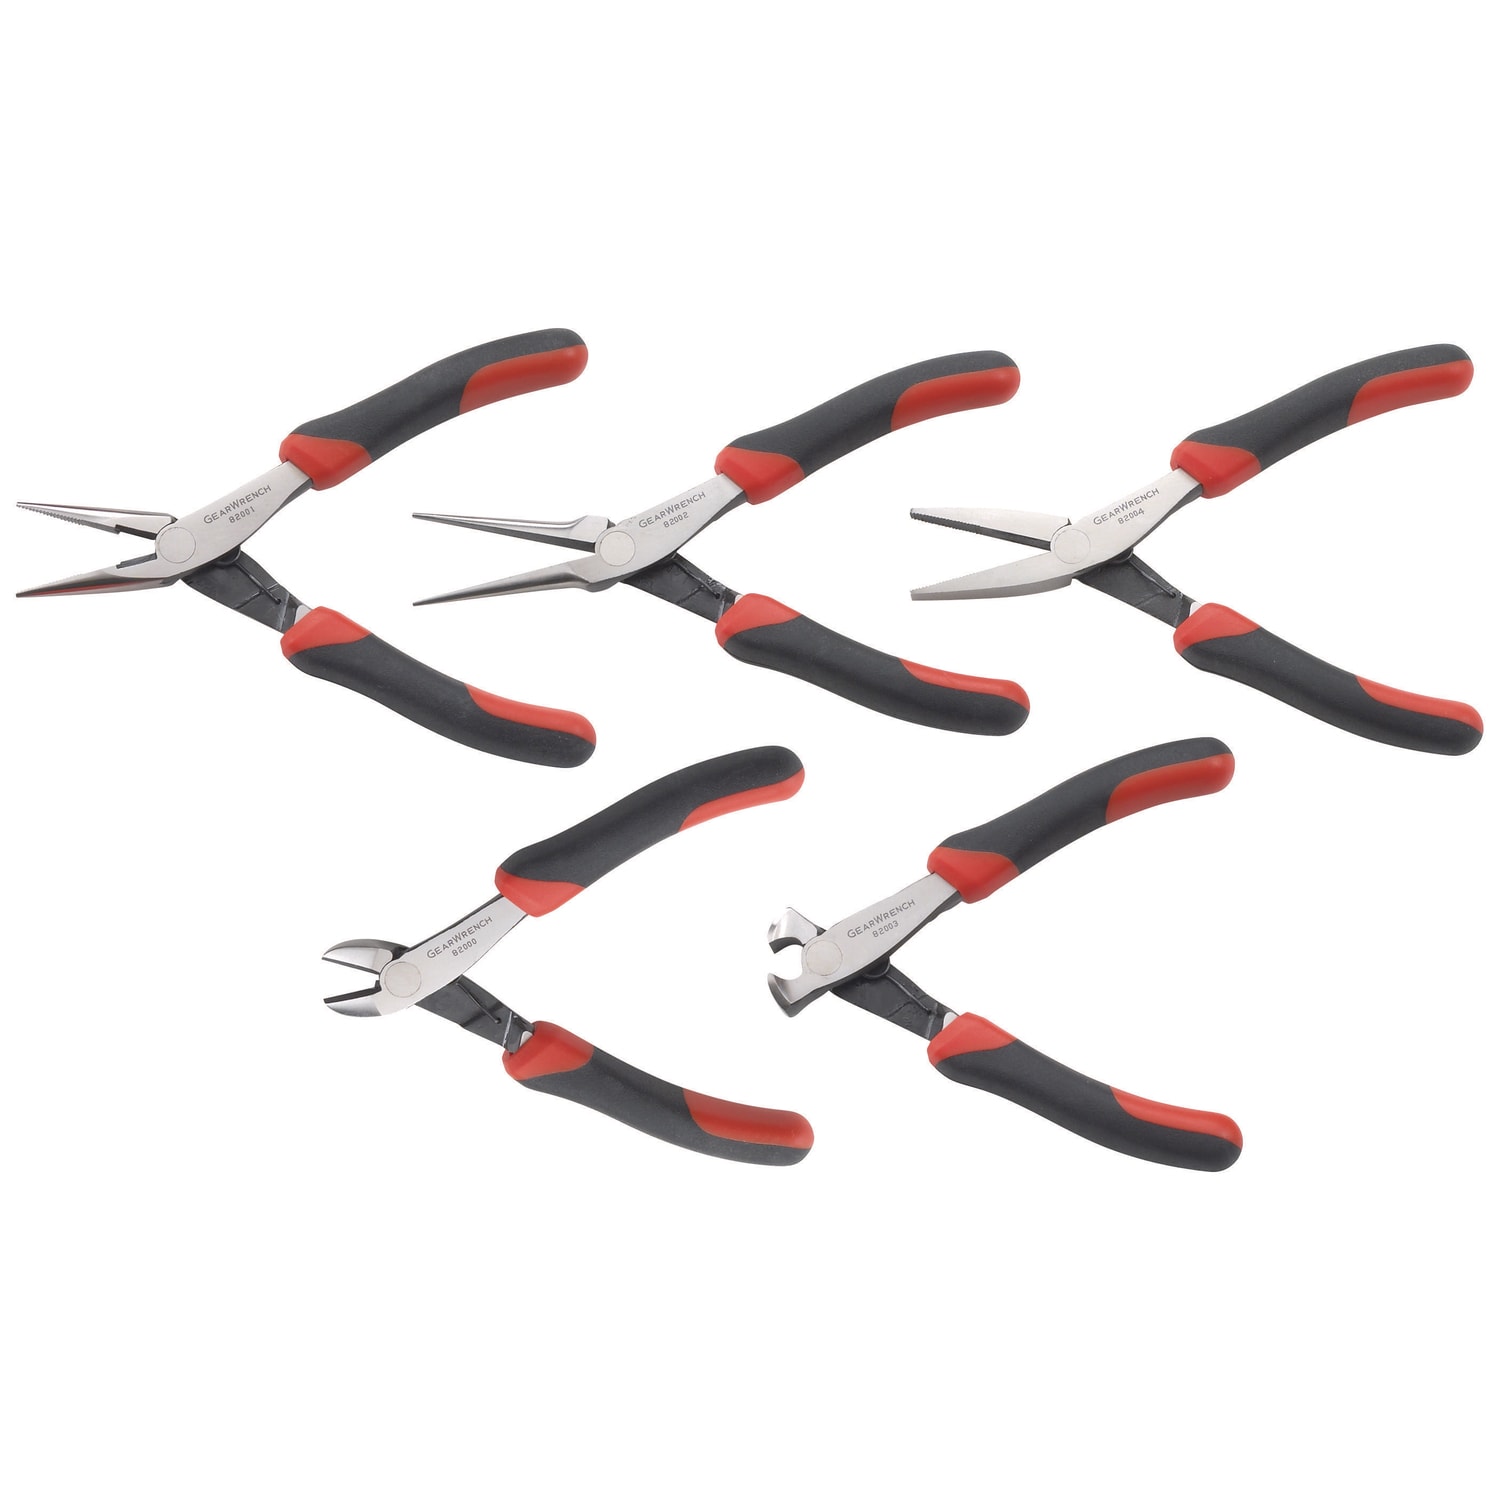 Kobalt 6-Pack Assorted Pliers with Soft Case